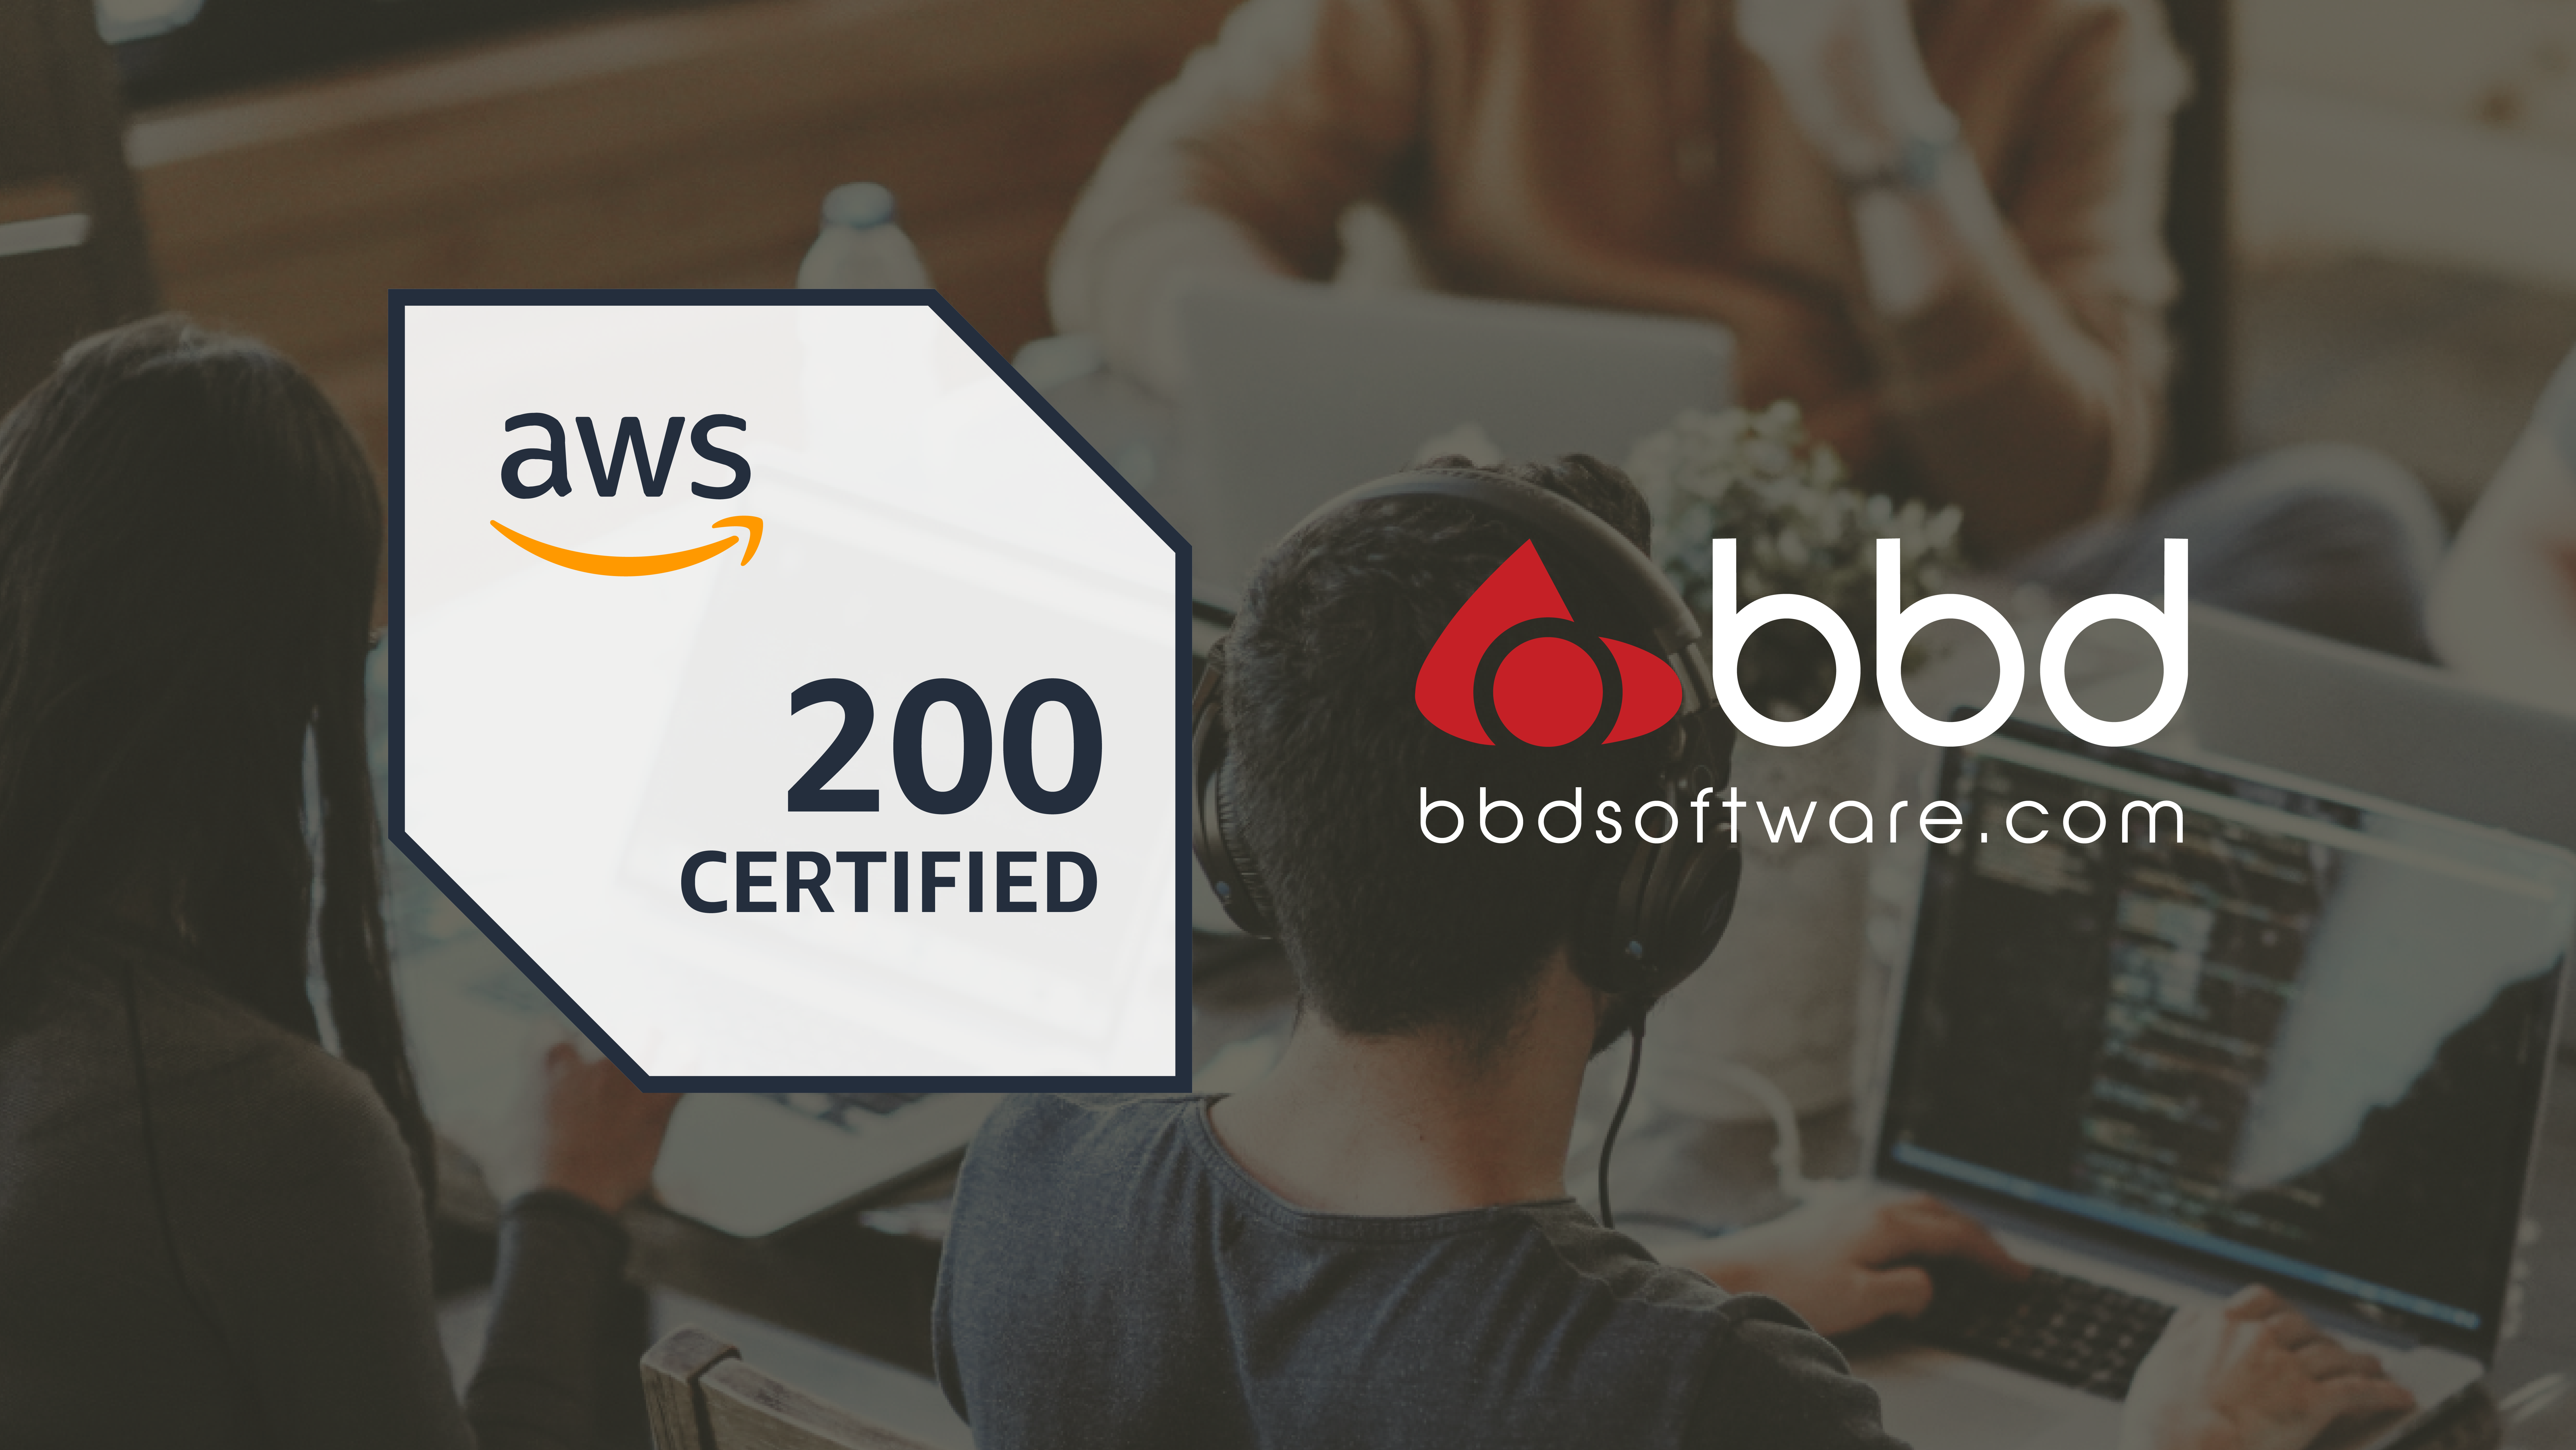 A new cloud milestone: 200 AWS certifications and counting